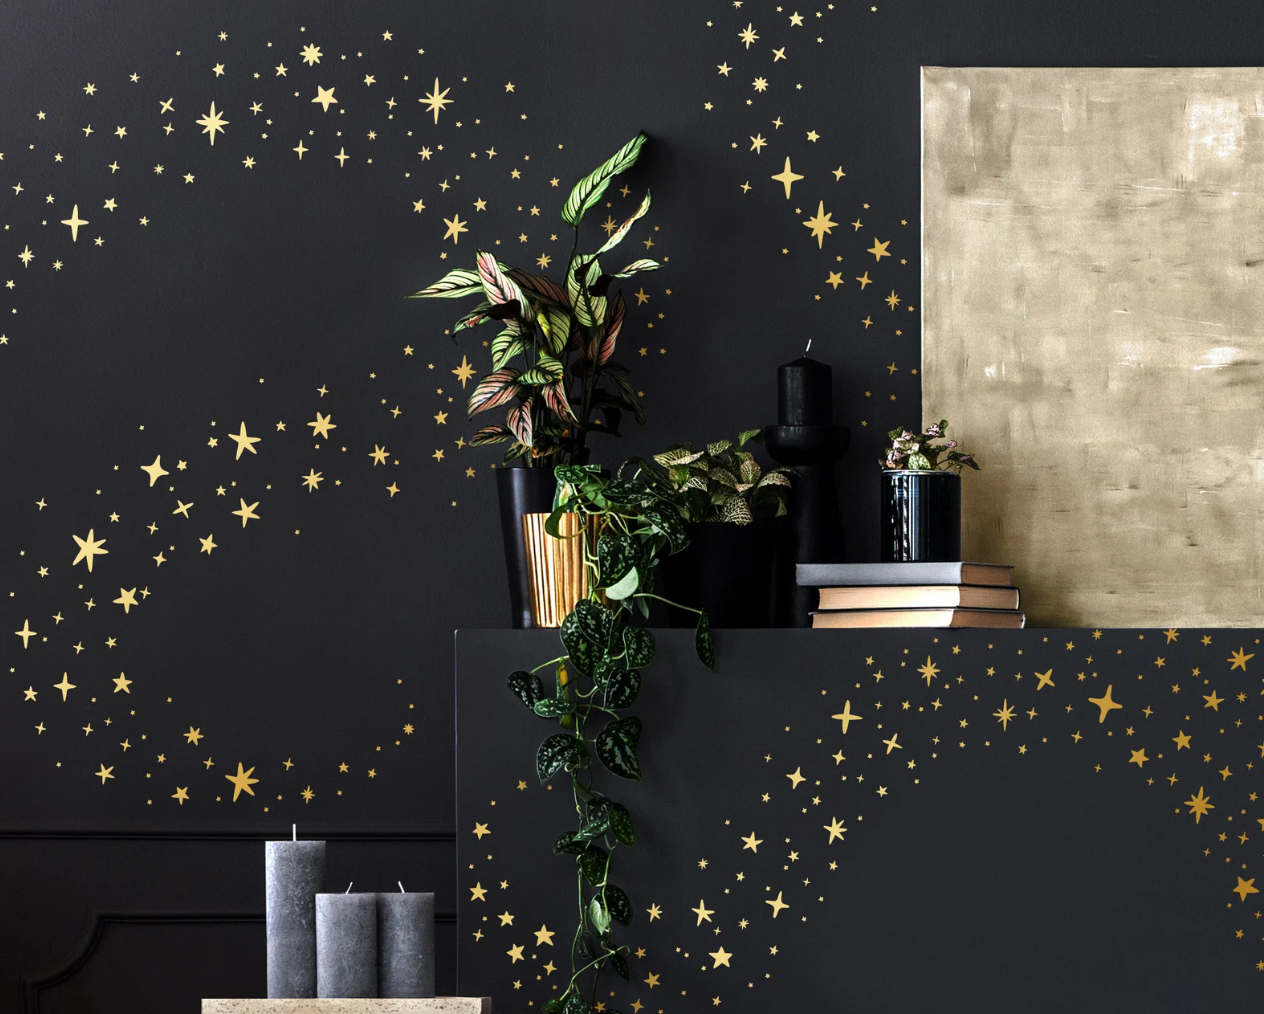 Golden star decals on a black wall